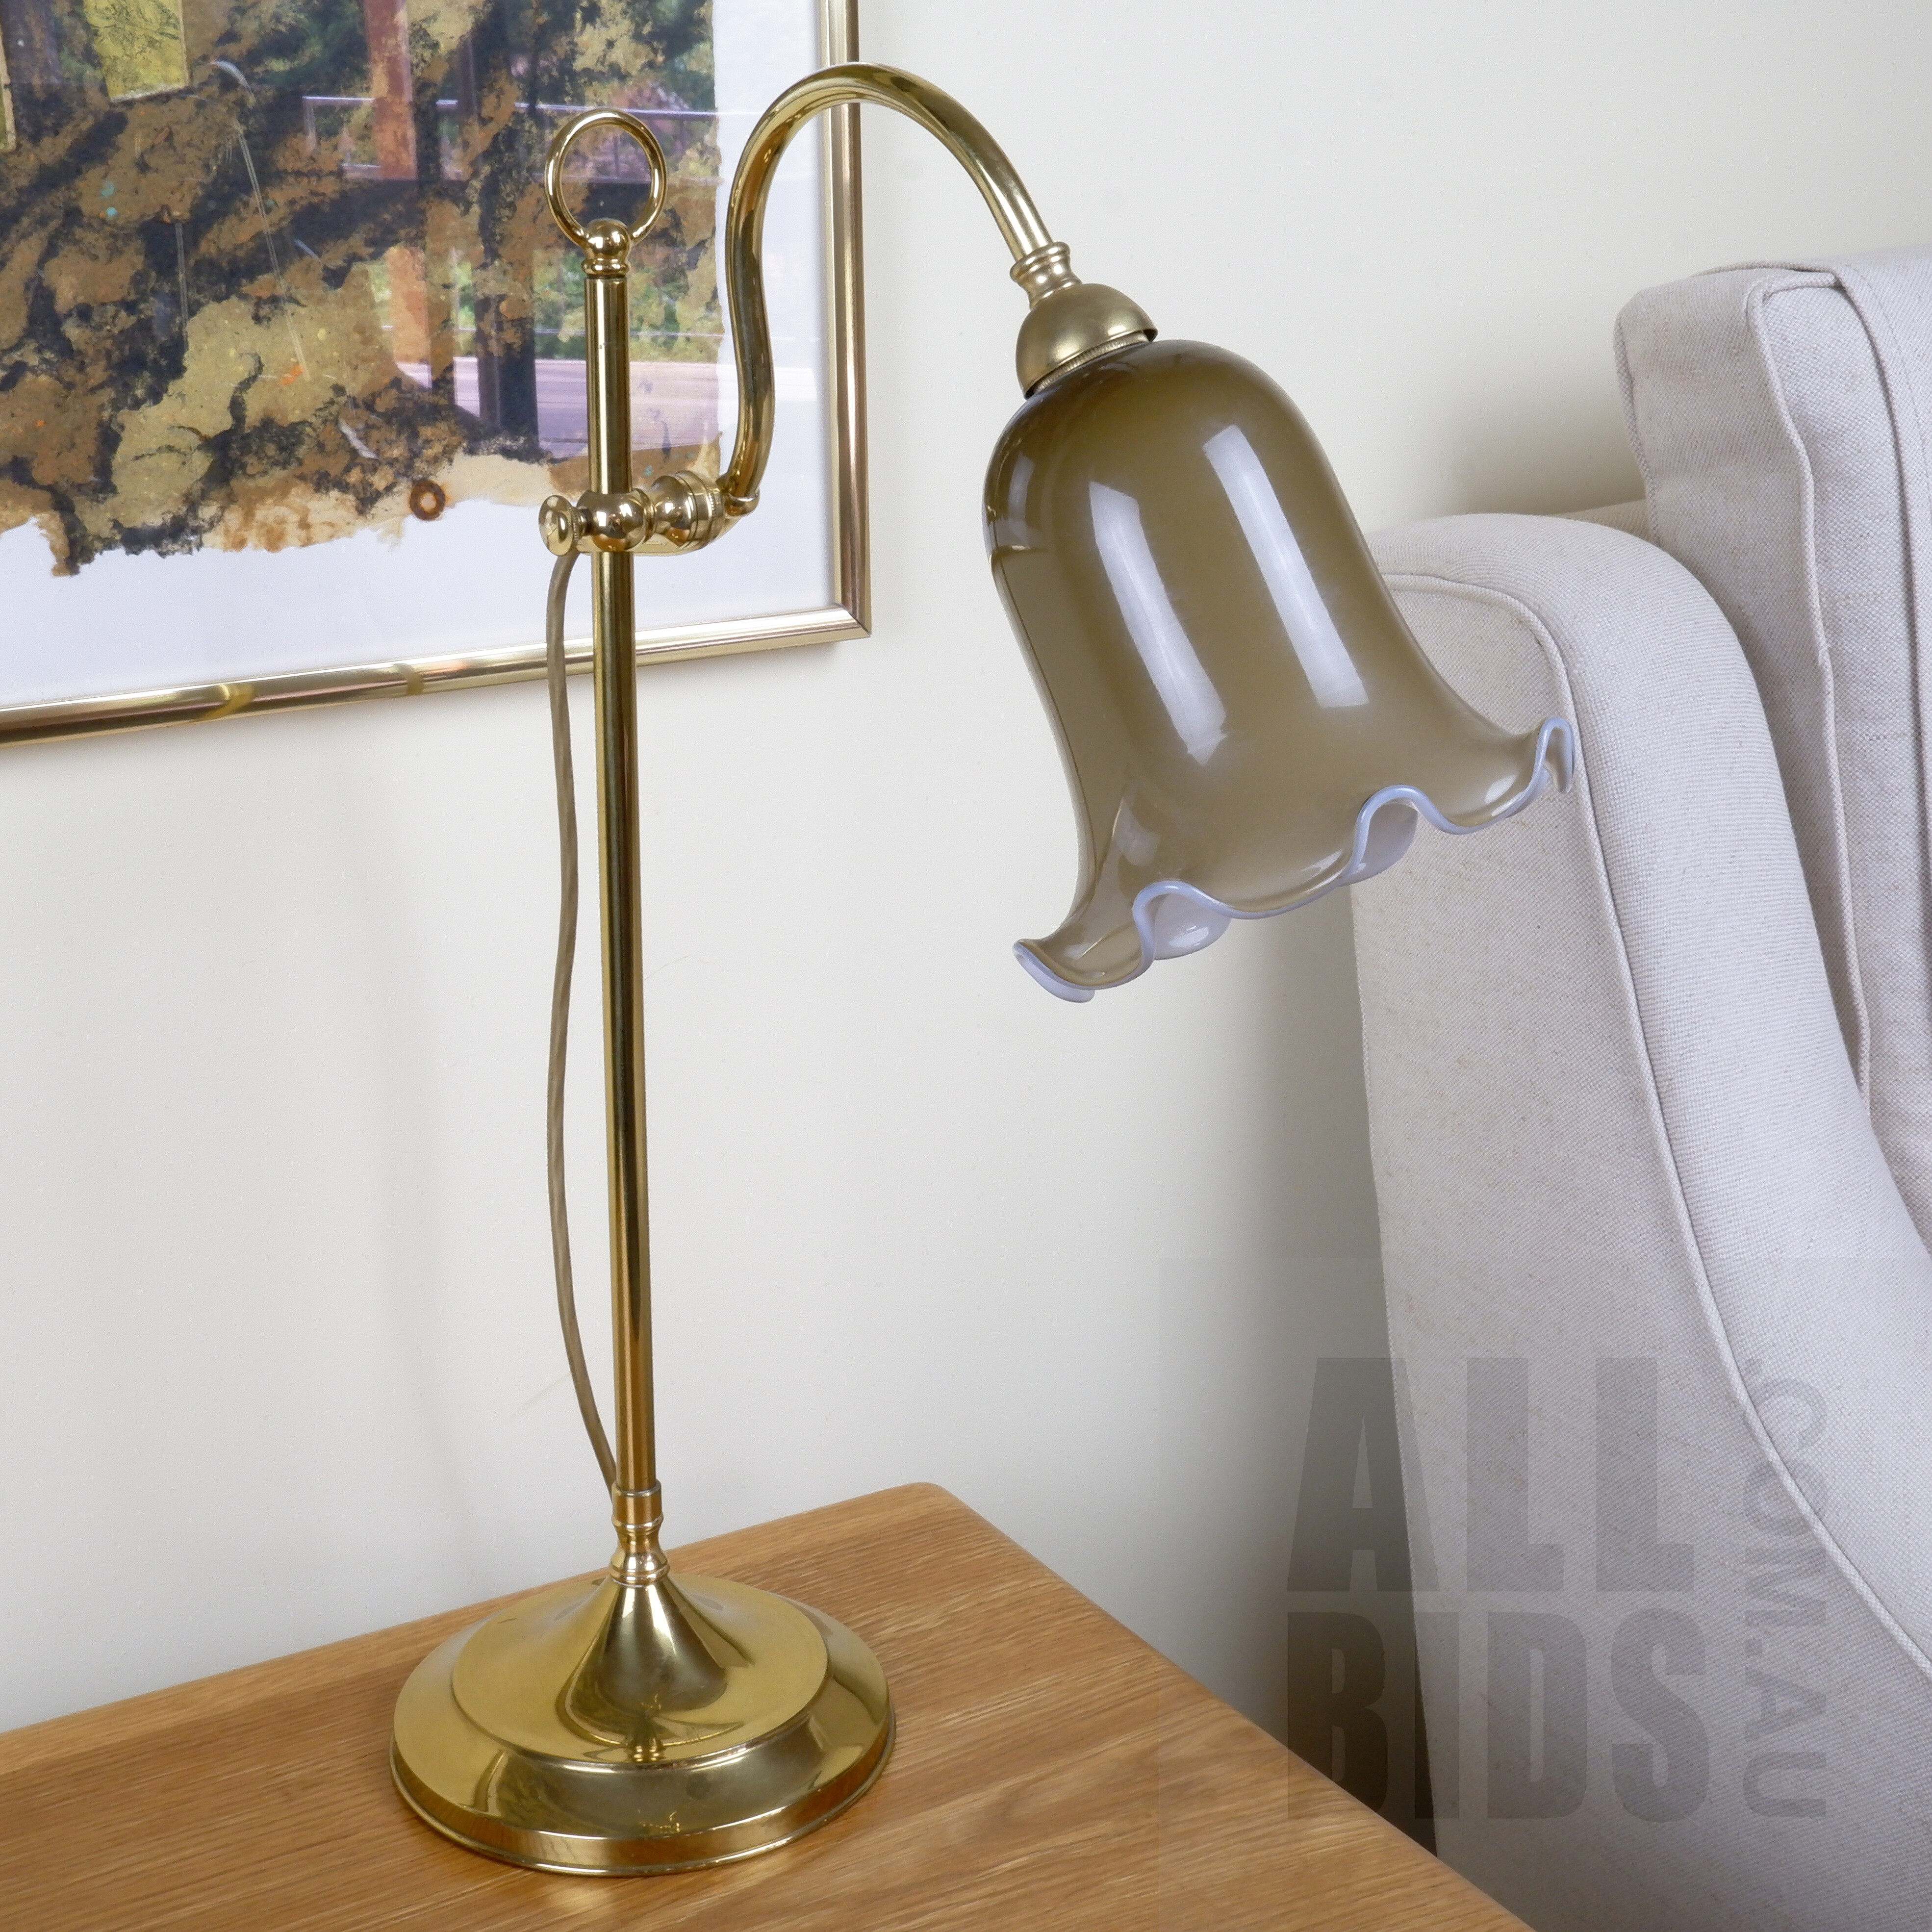 'Vintage Adjustable Brass Table Lamp with Tulip Glass Shade'